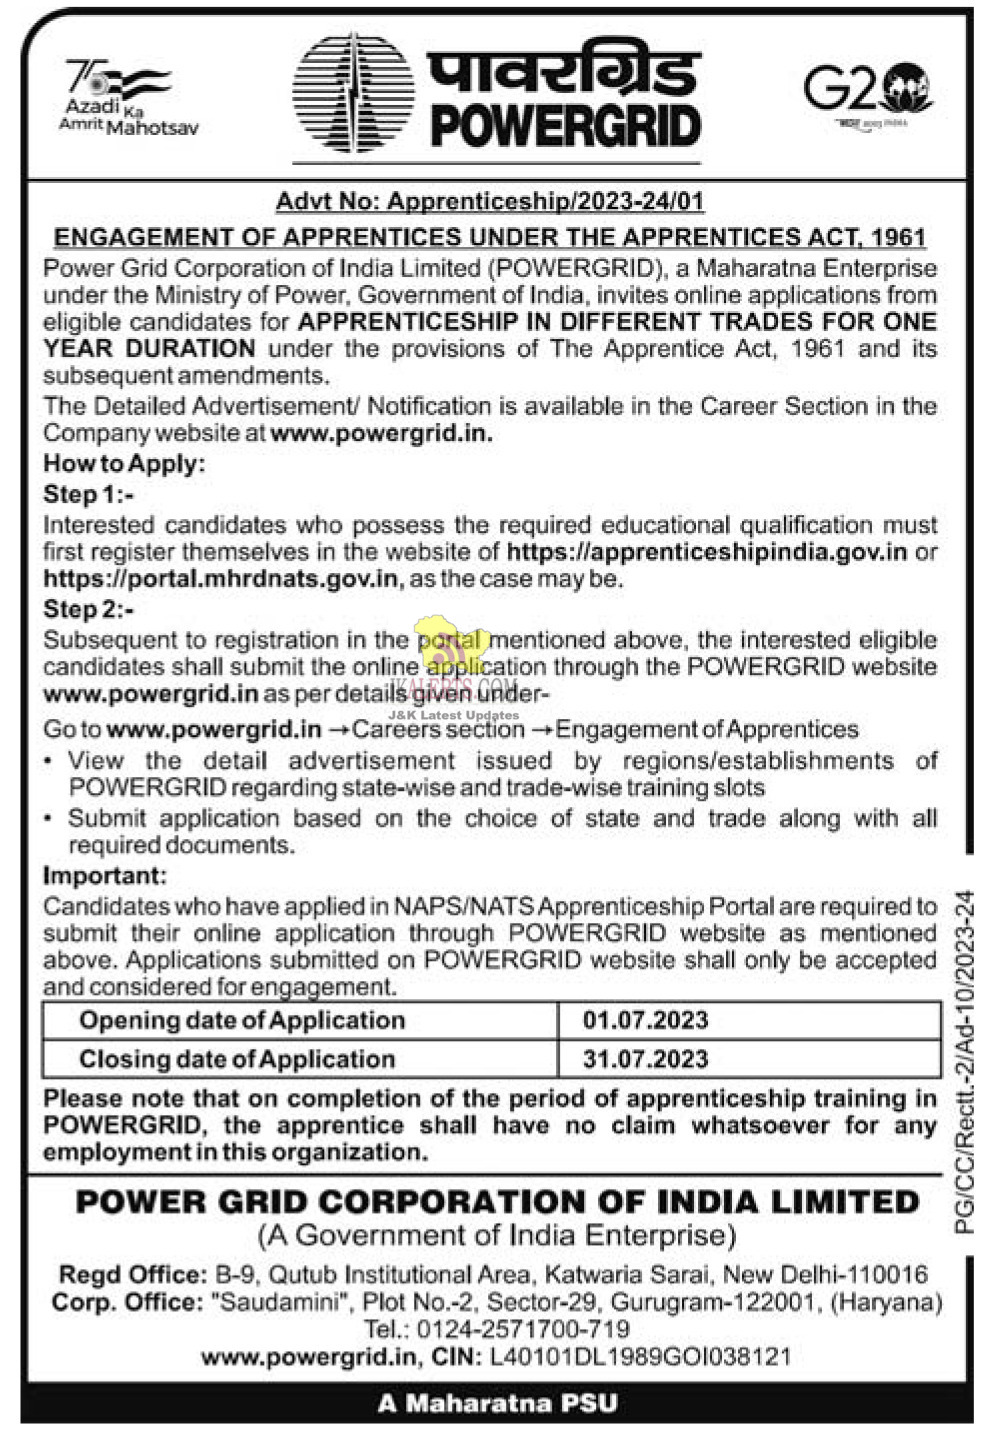 Jobs in Power Grid Corporation of India Limited.